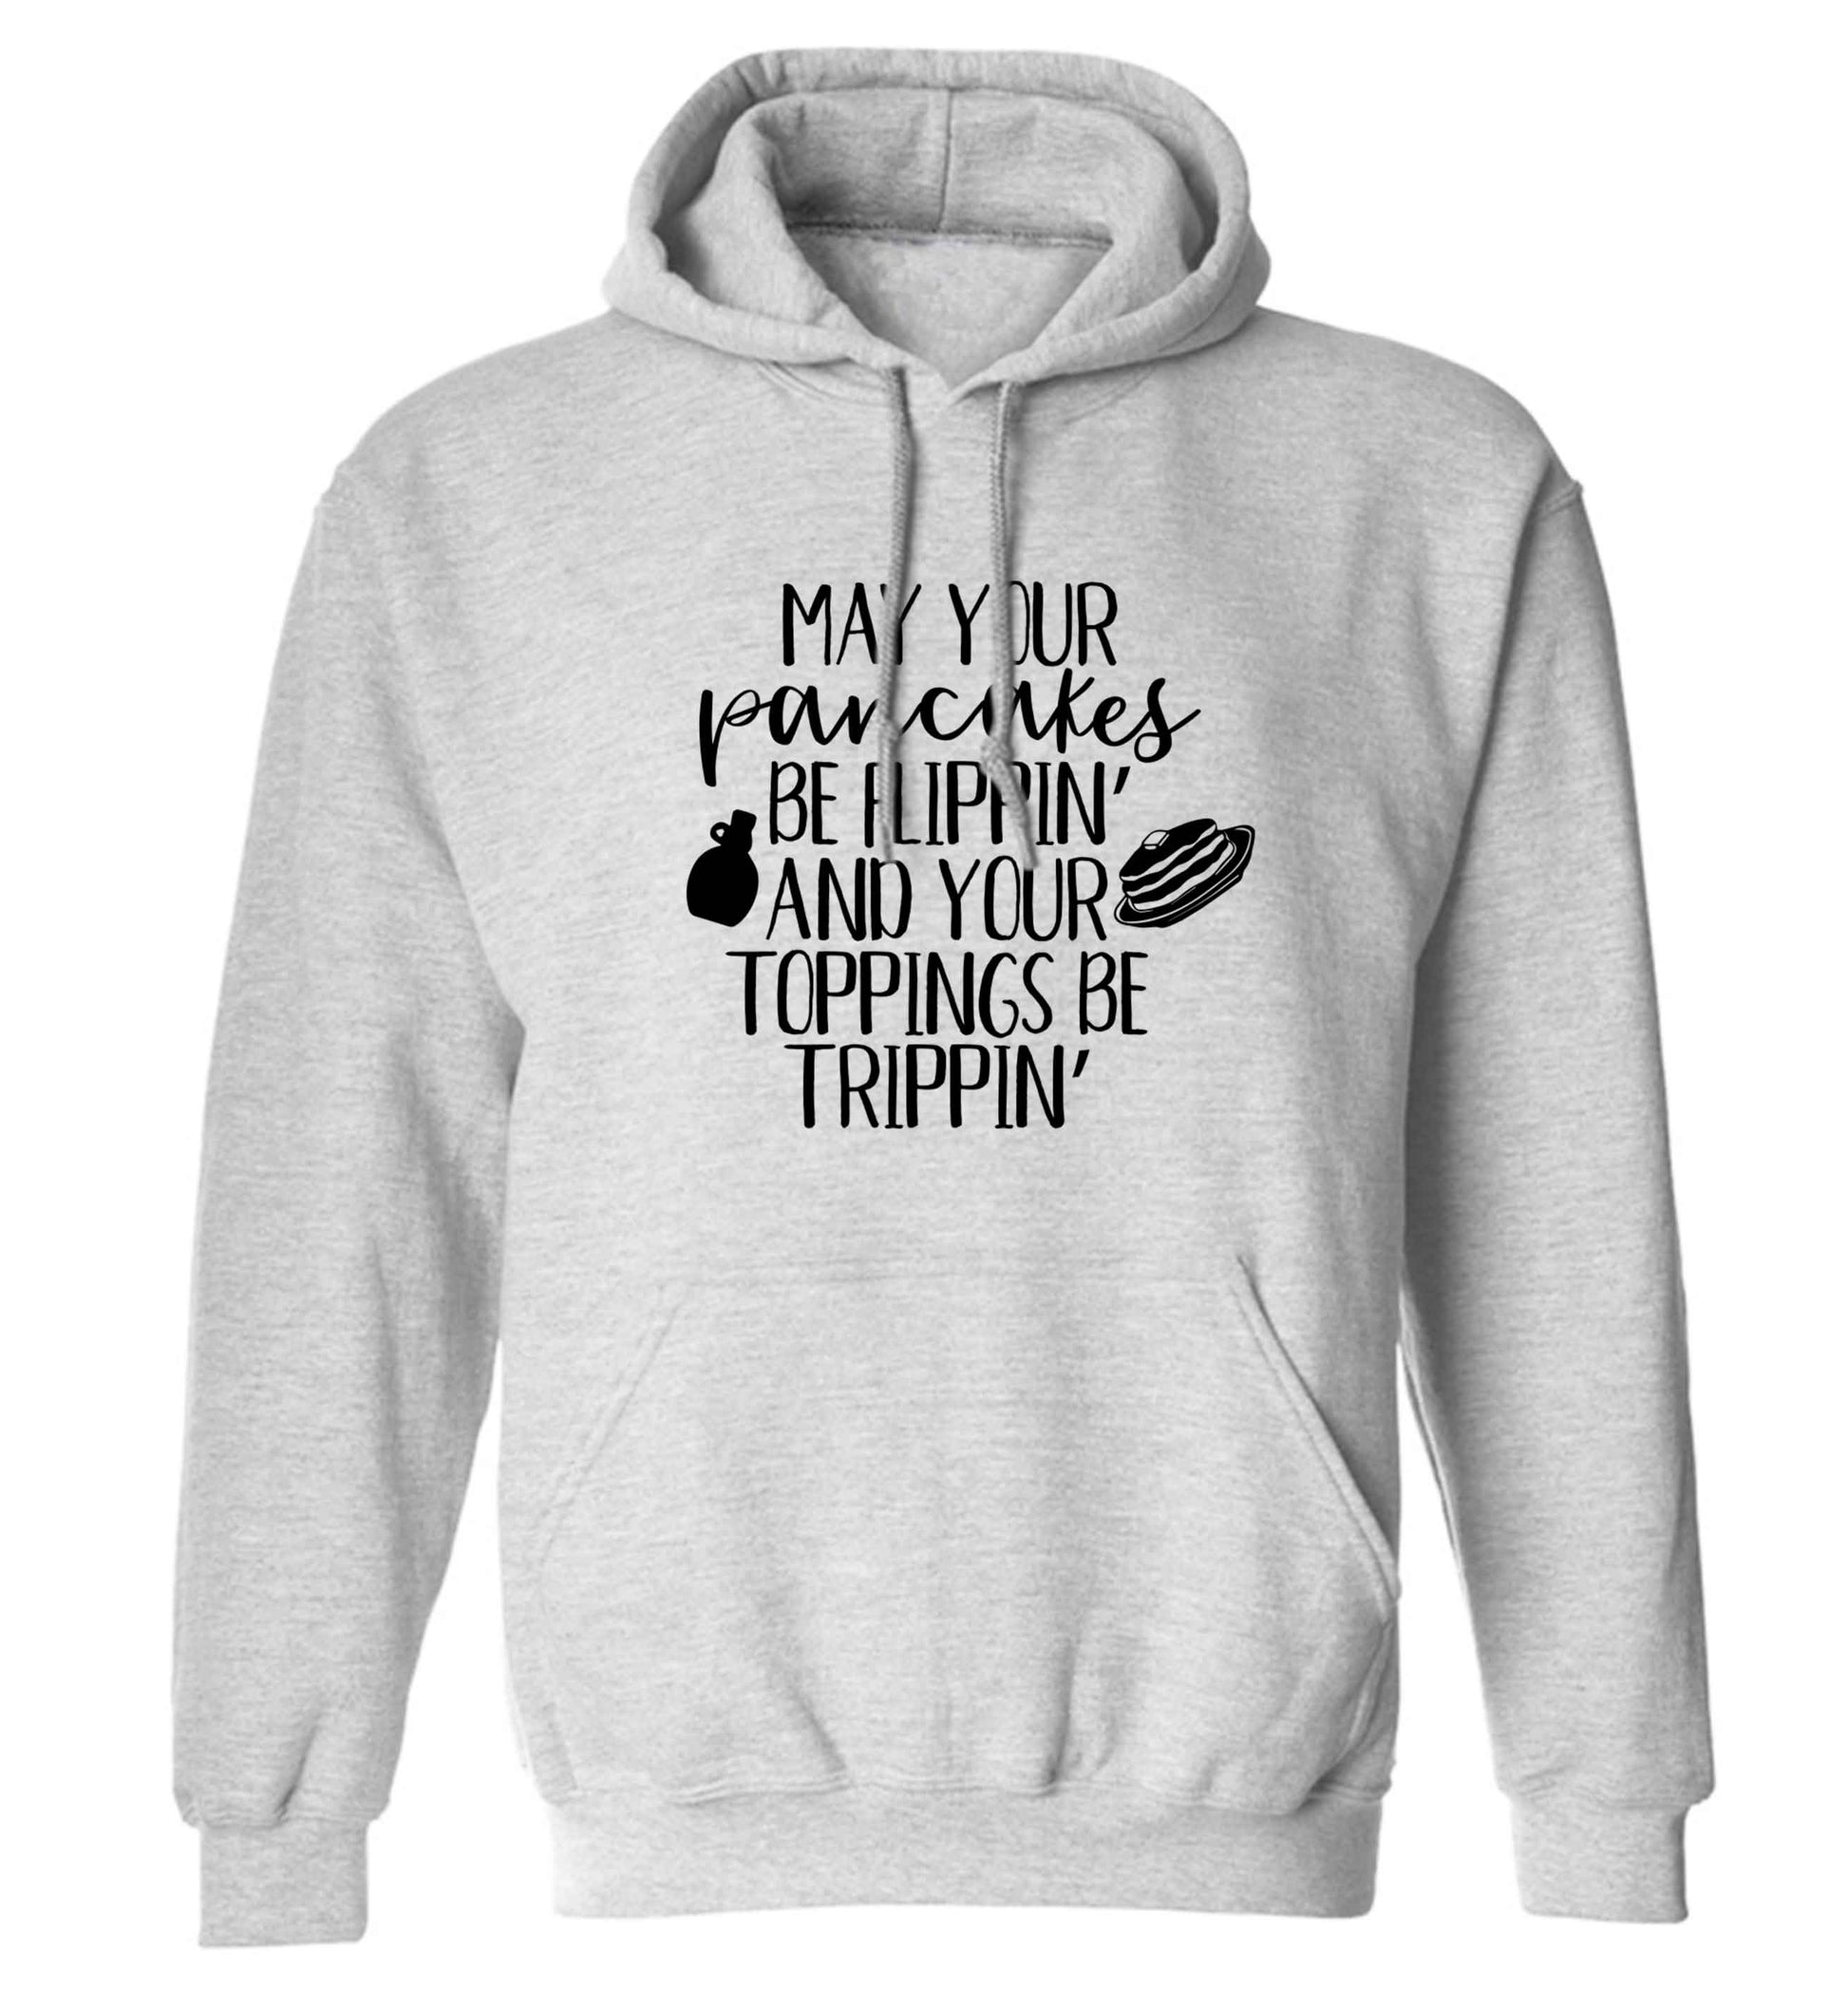 May your pancakes be flippin' and your toppings be trippin' adults unisex grey hoodie 2XL